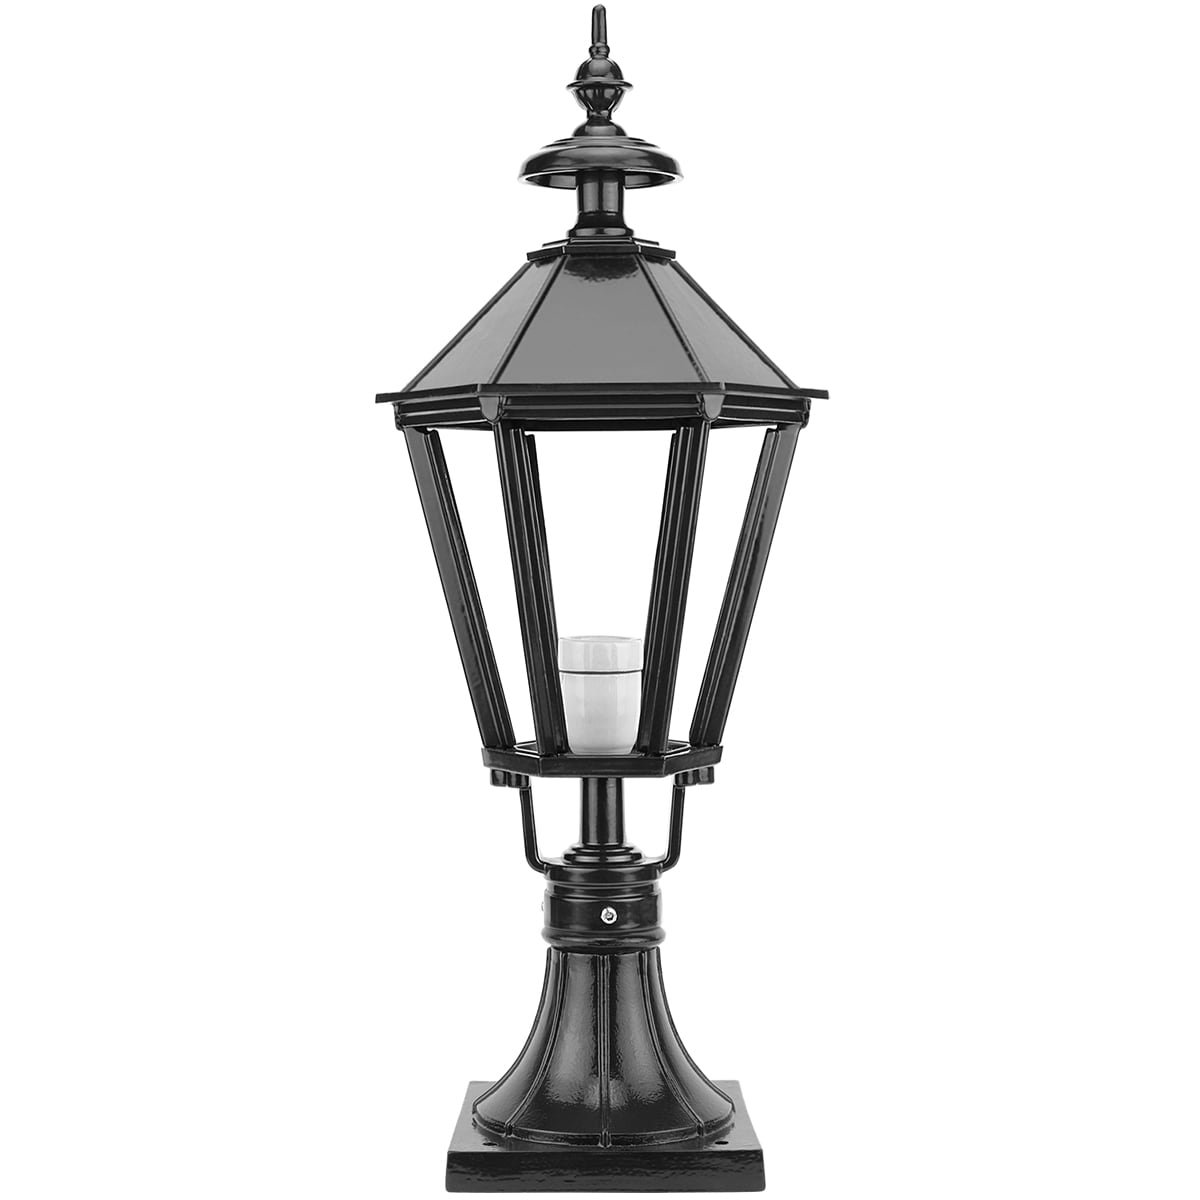 Outdoor Lighting Country Style Pedestal lamp Maastricht L - 79 cm